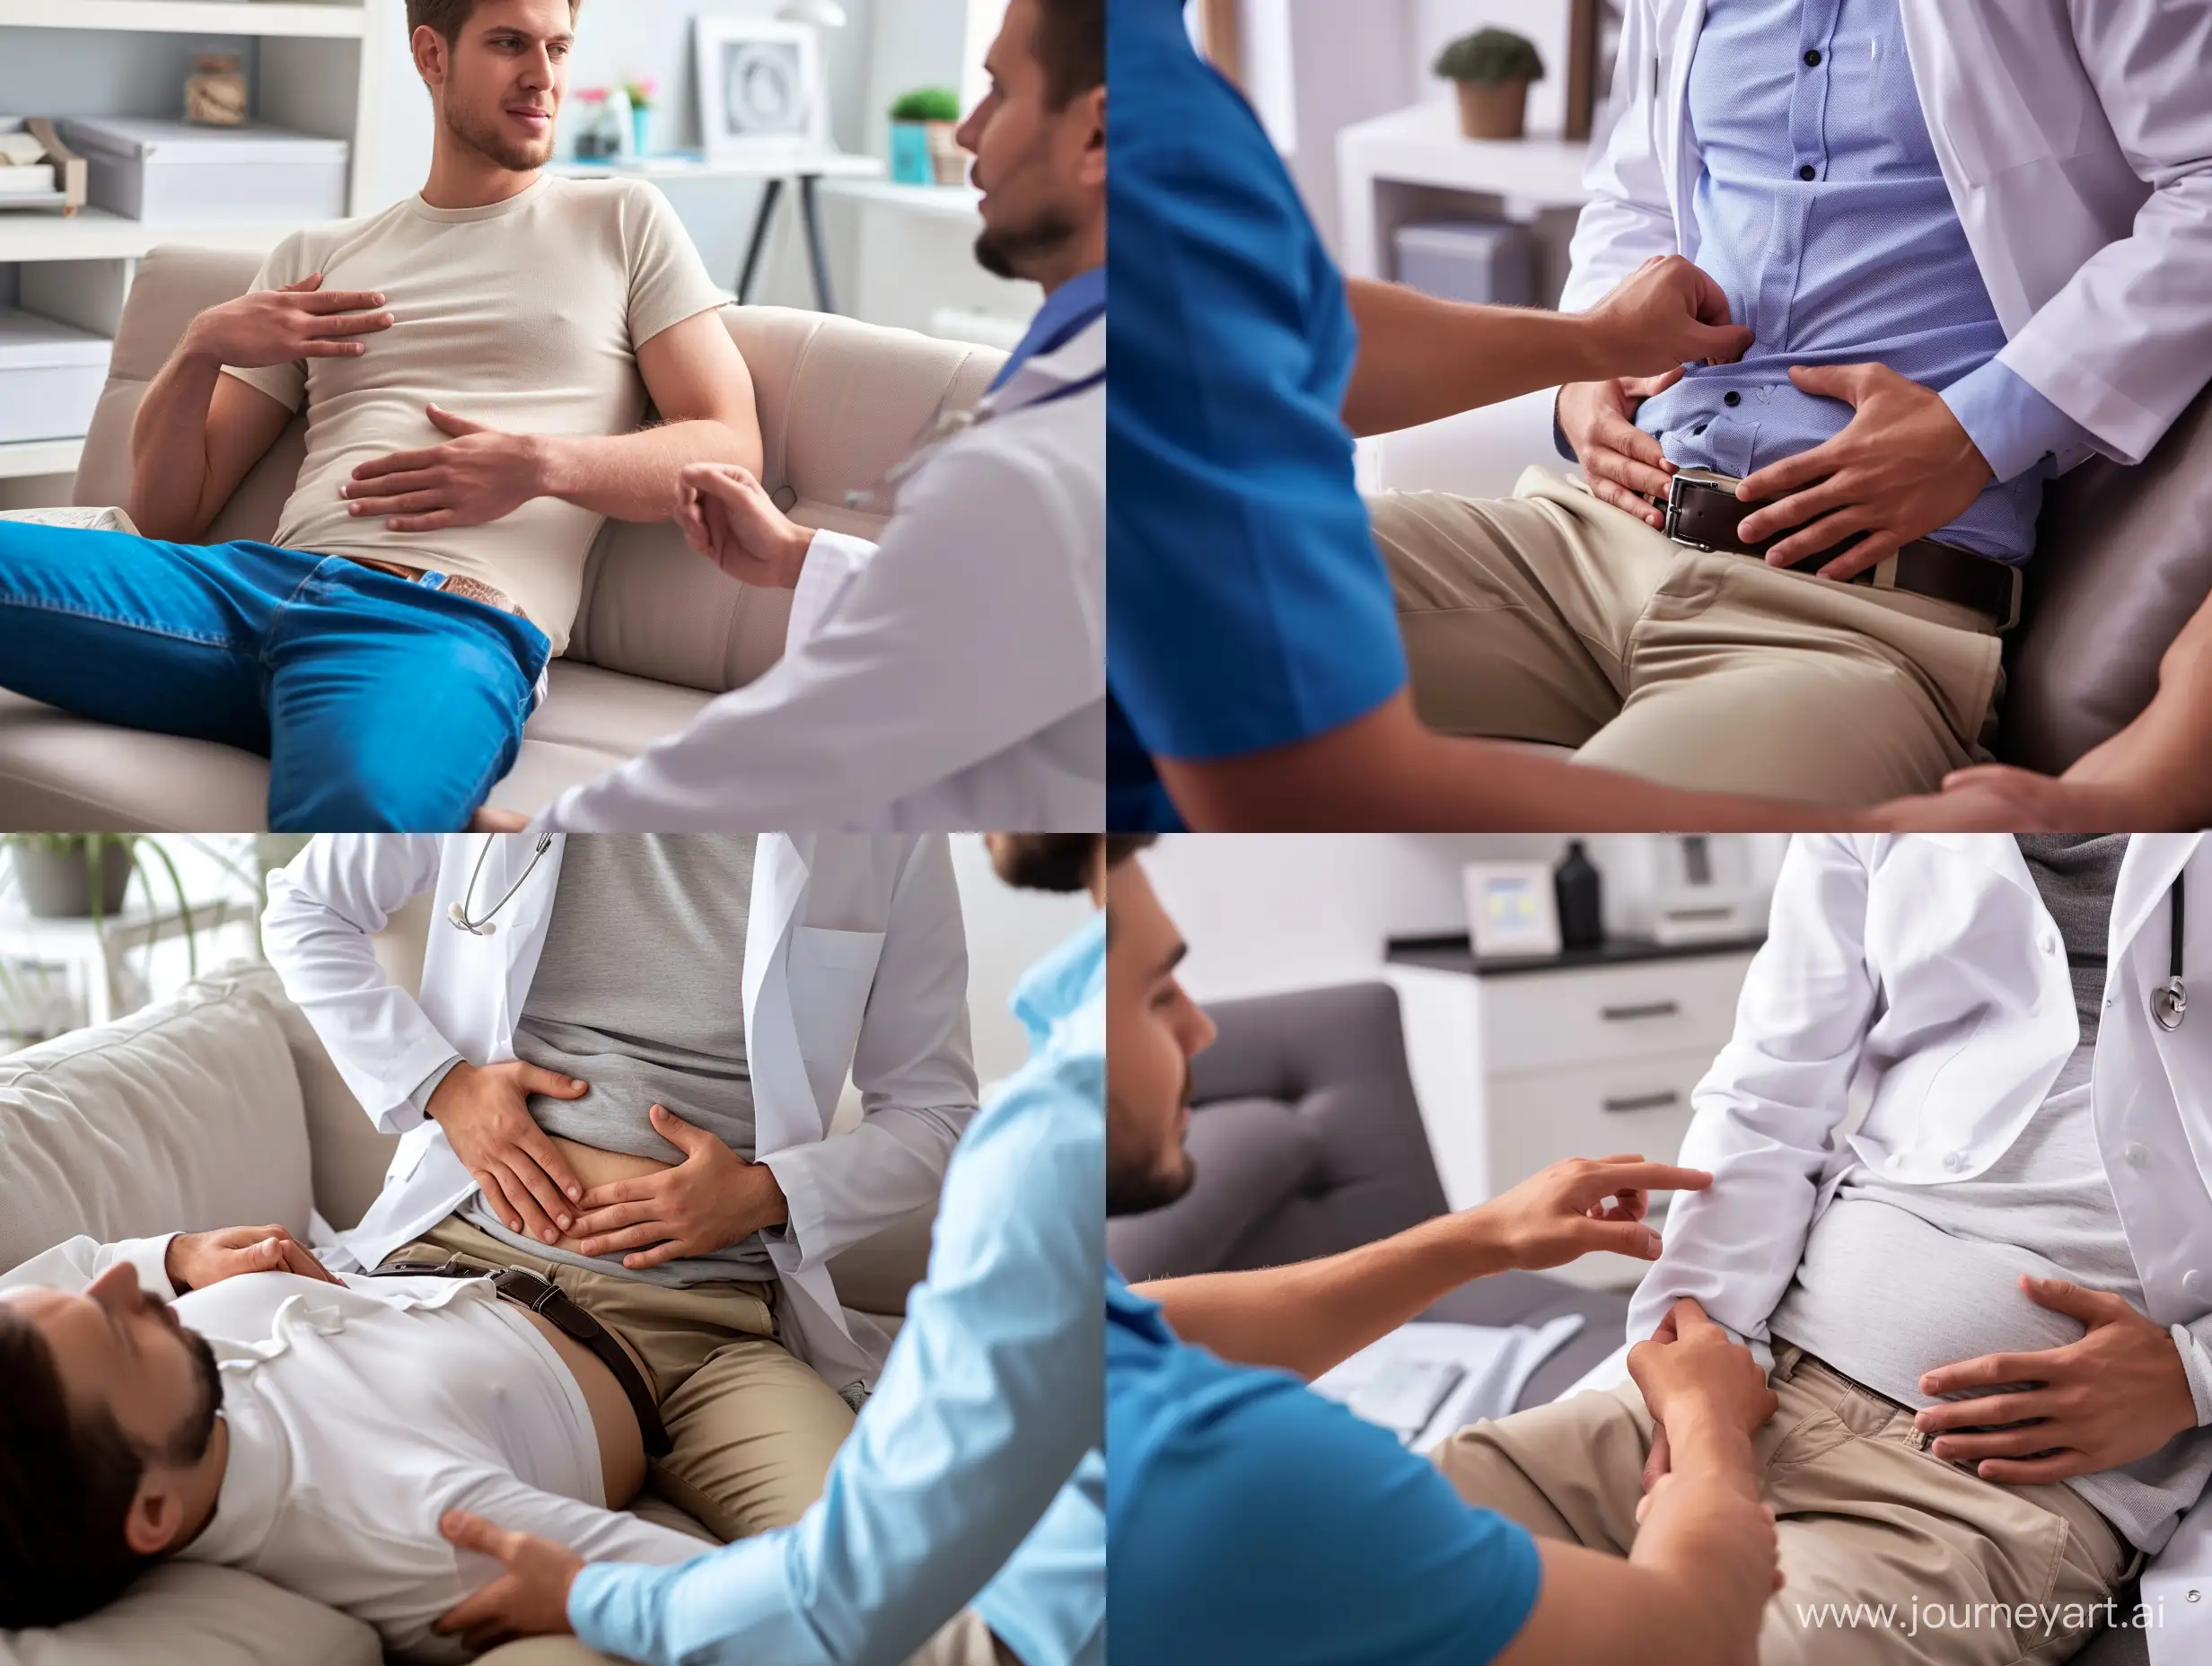 Detailed-Abdominal-Palpation-by-Doctor-on-Male-Patient